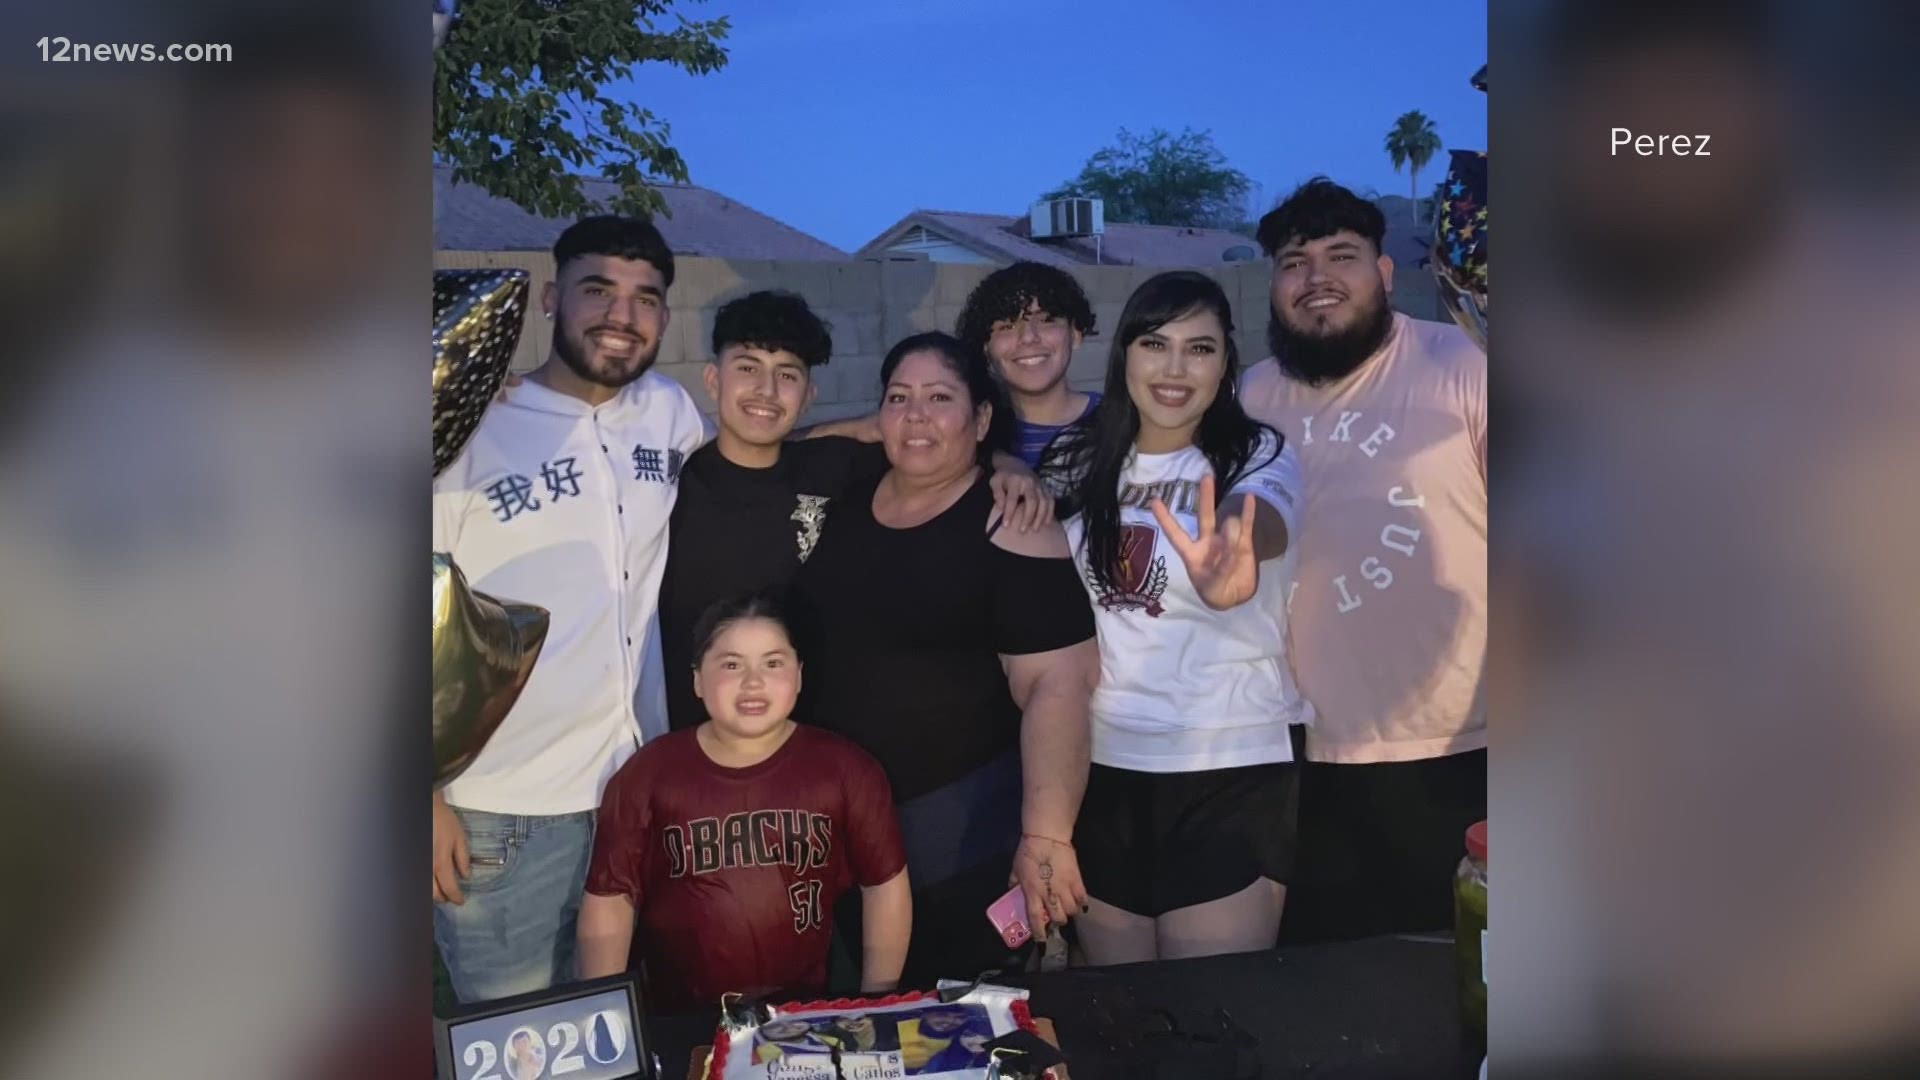 Vanessa Perez is now taking care of her five siblings after a mother of six lost her battle with COVID-19. Mayra died this month.